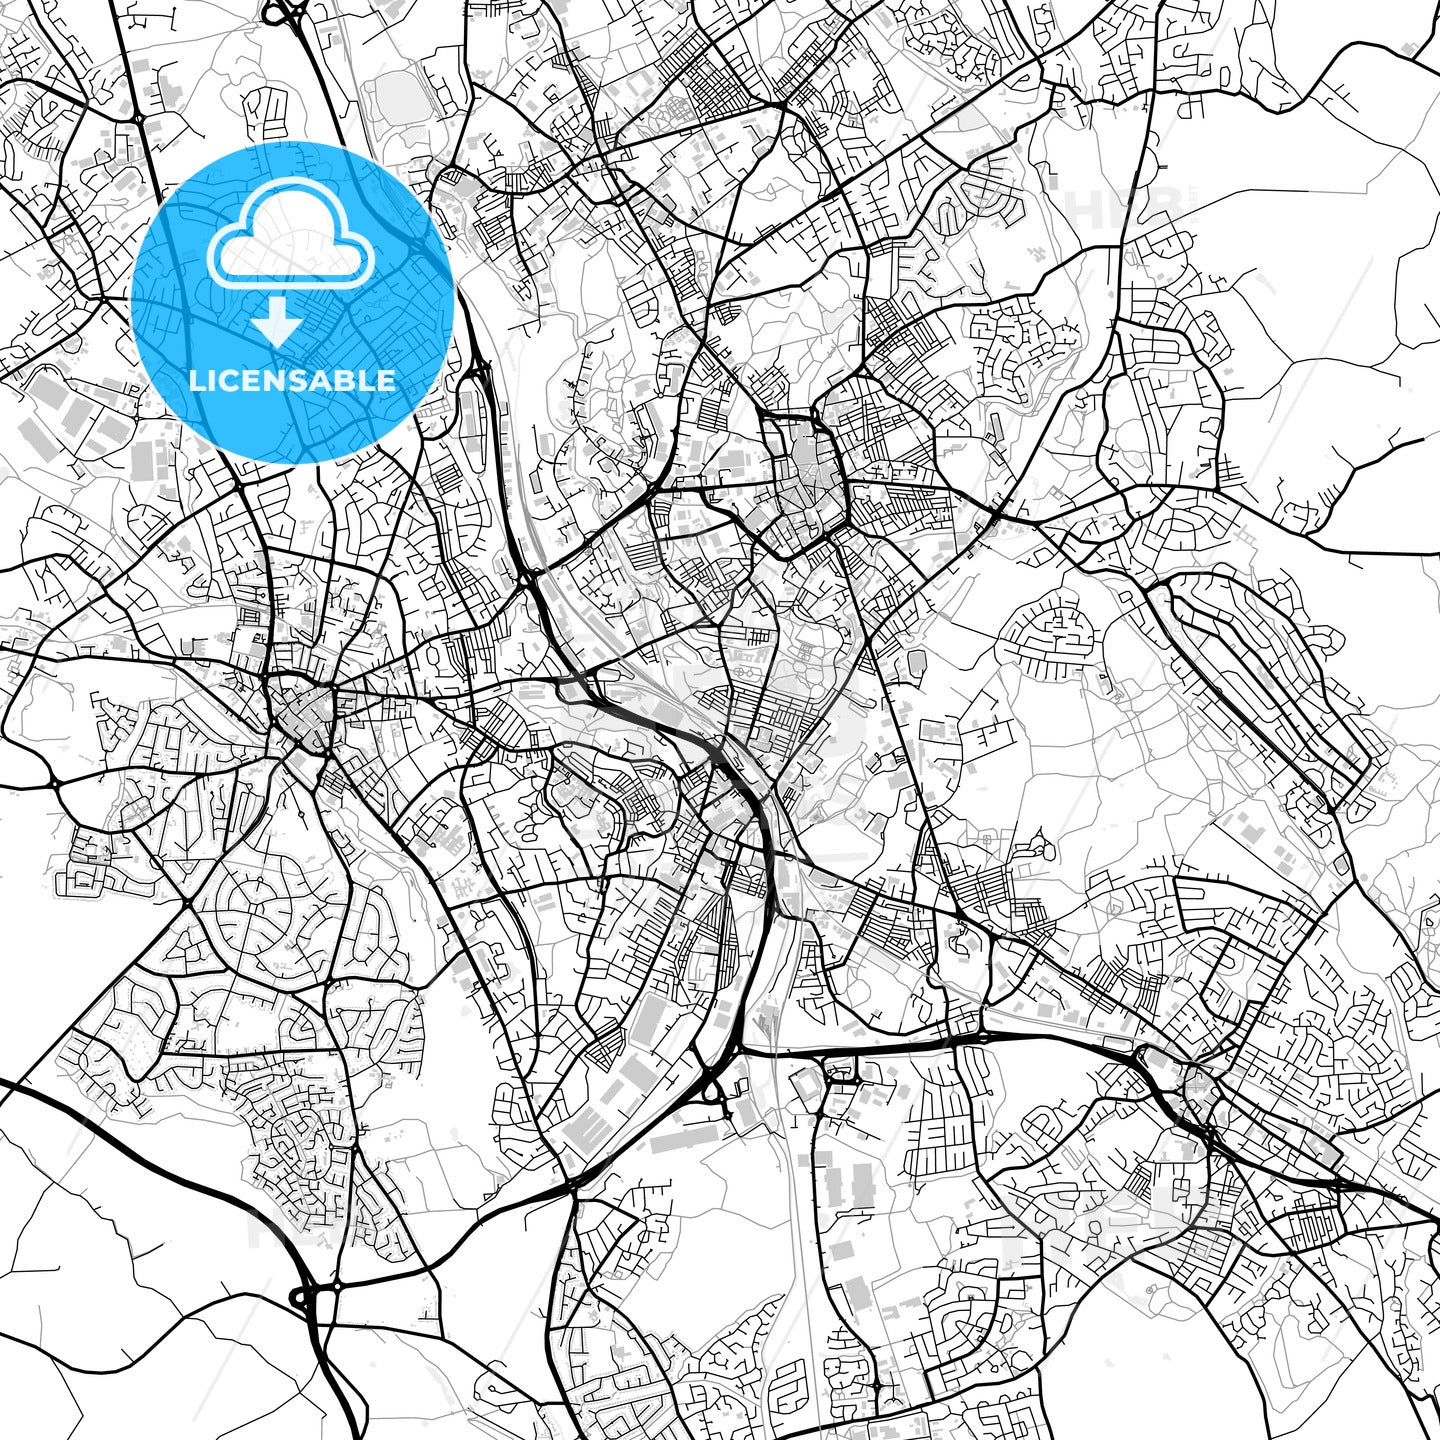 Downtown map of Stoke-on-Trent, light